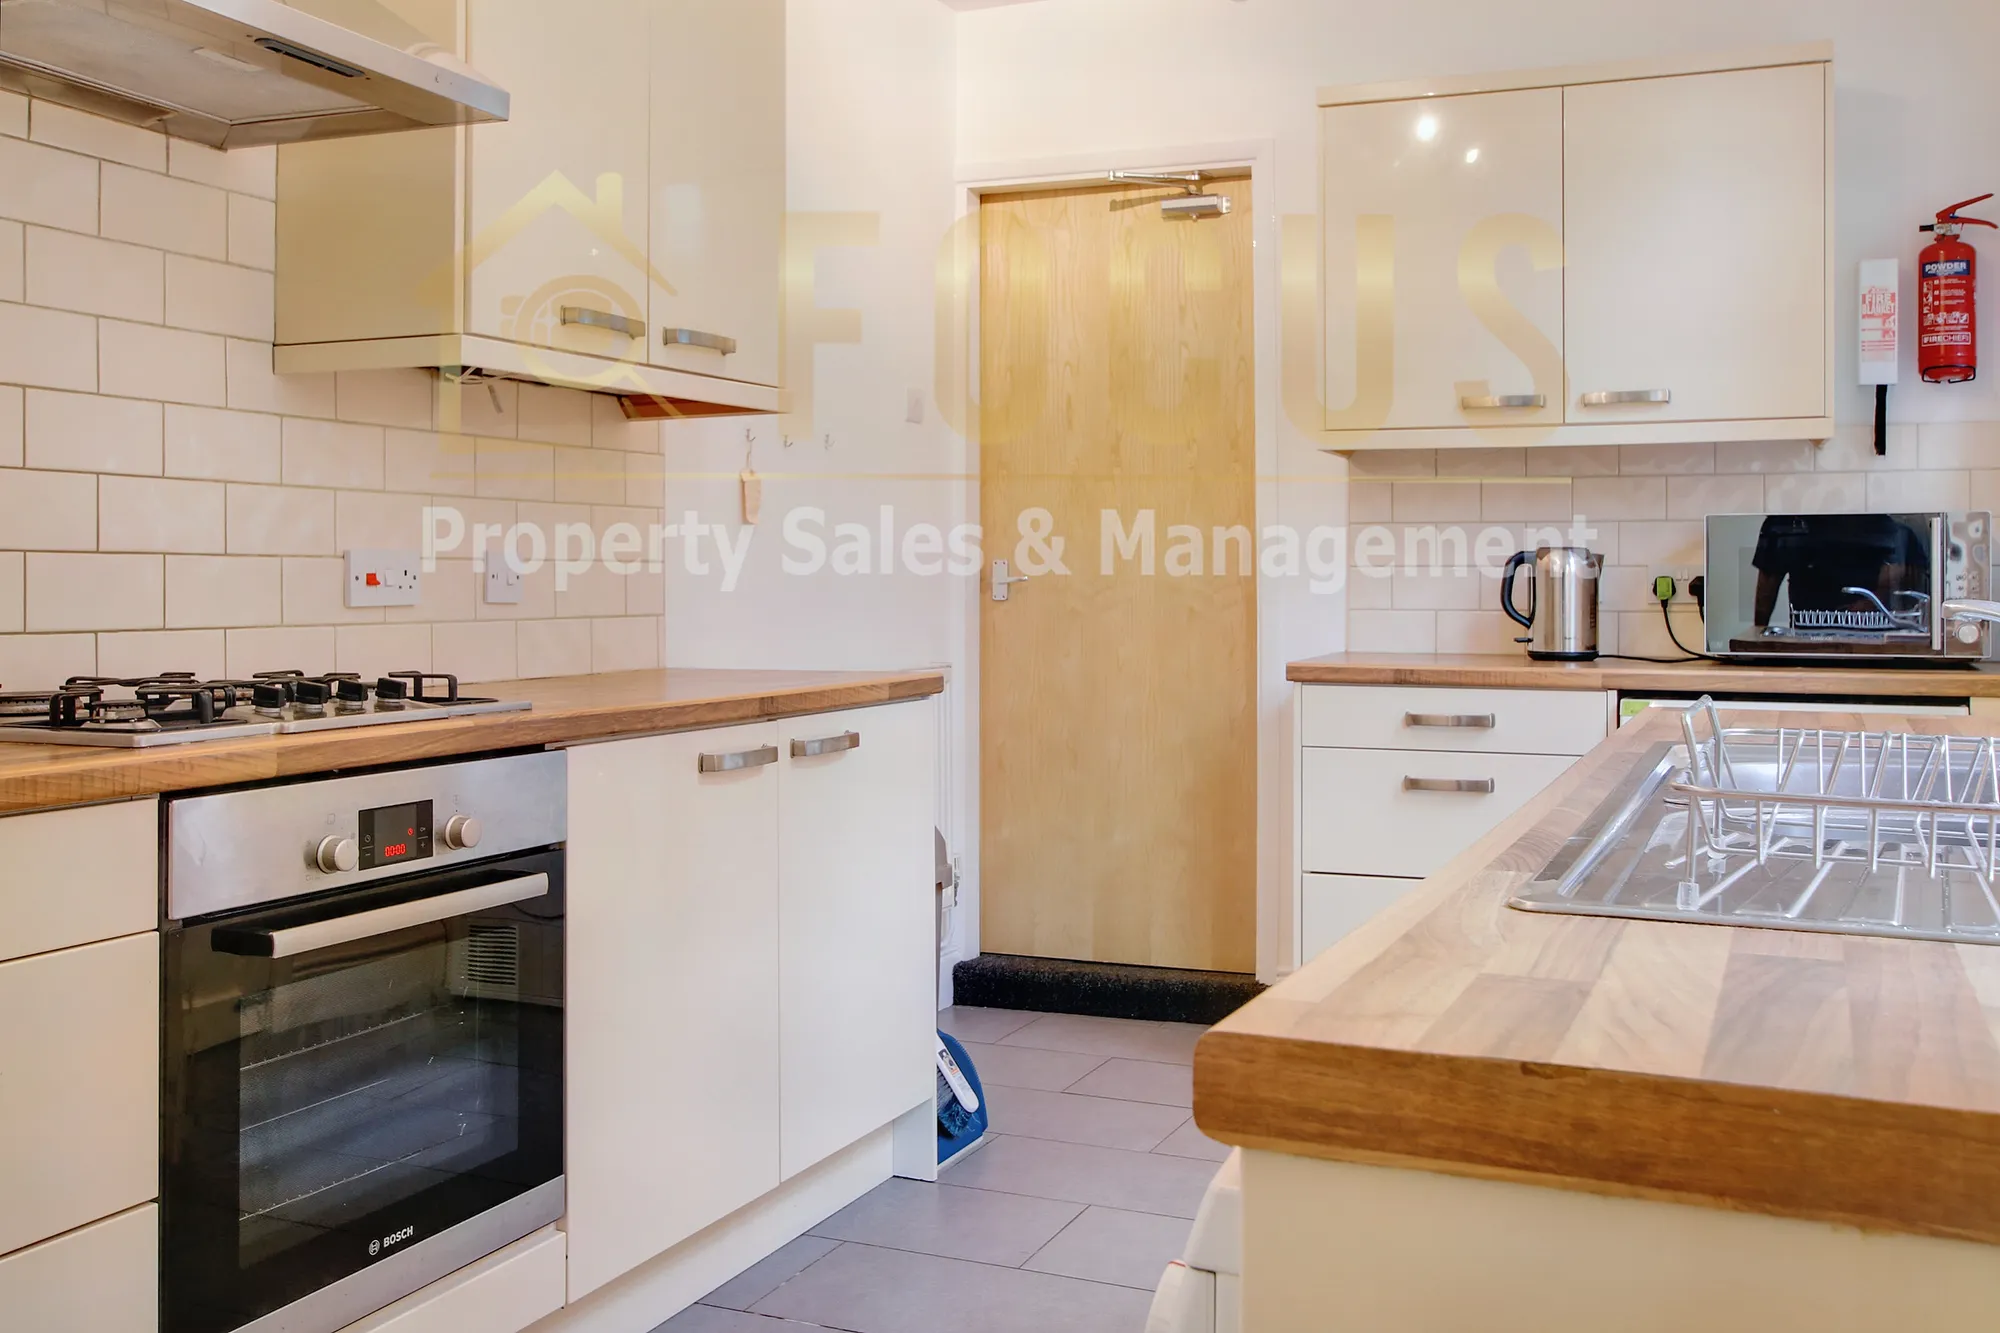 4 bed mid-terraced house to rent in Hartopp Road, Leicester  - Property Image 7